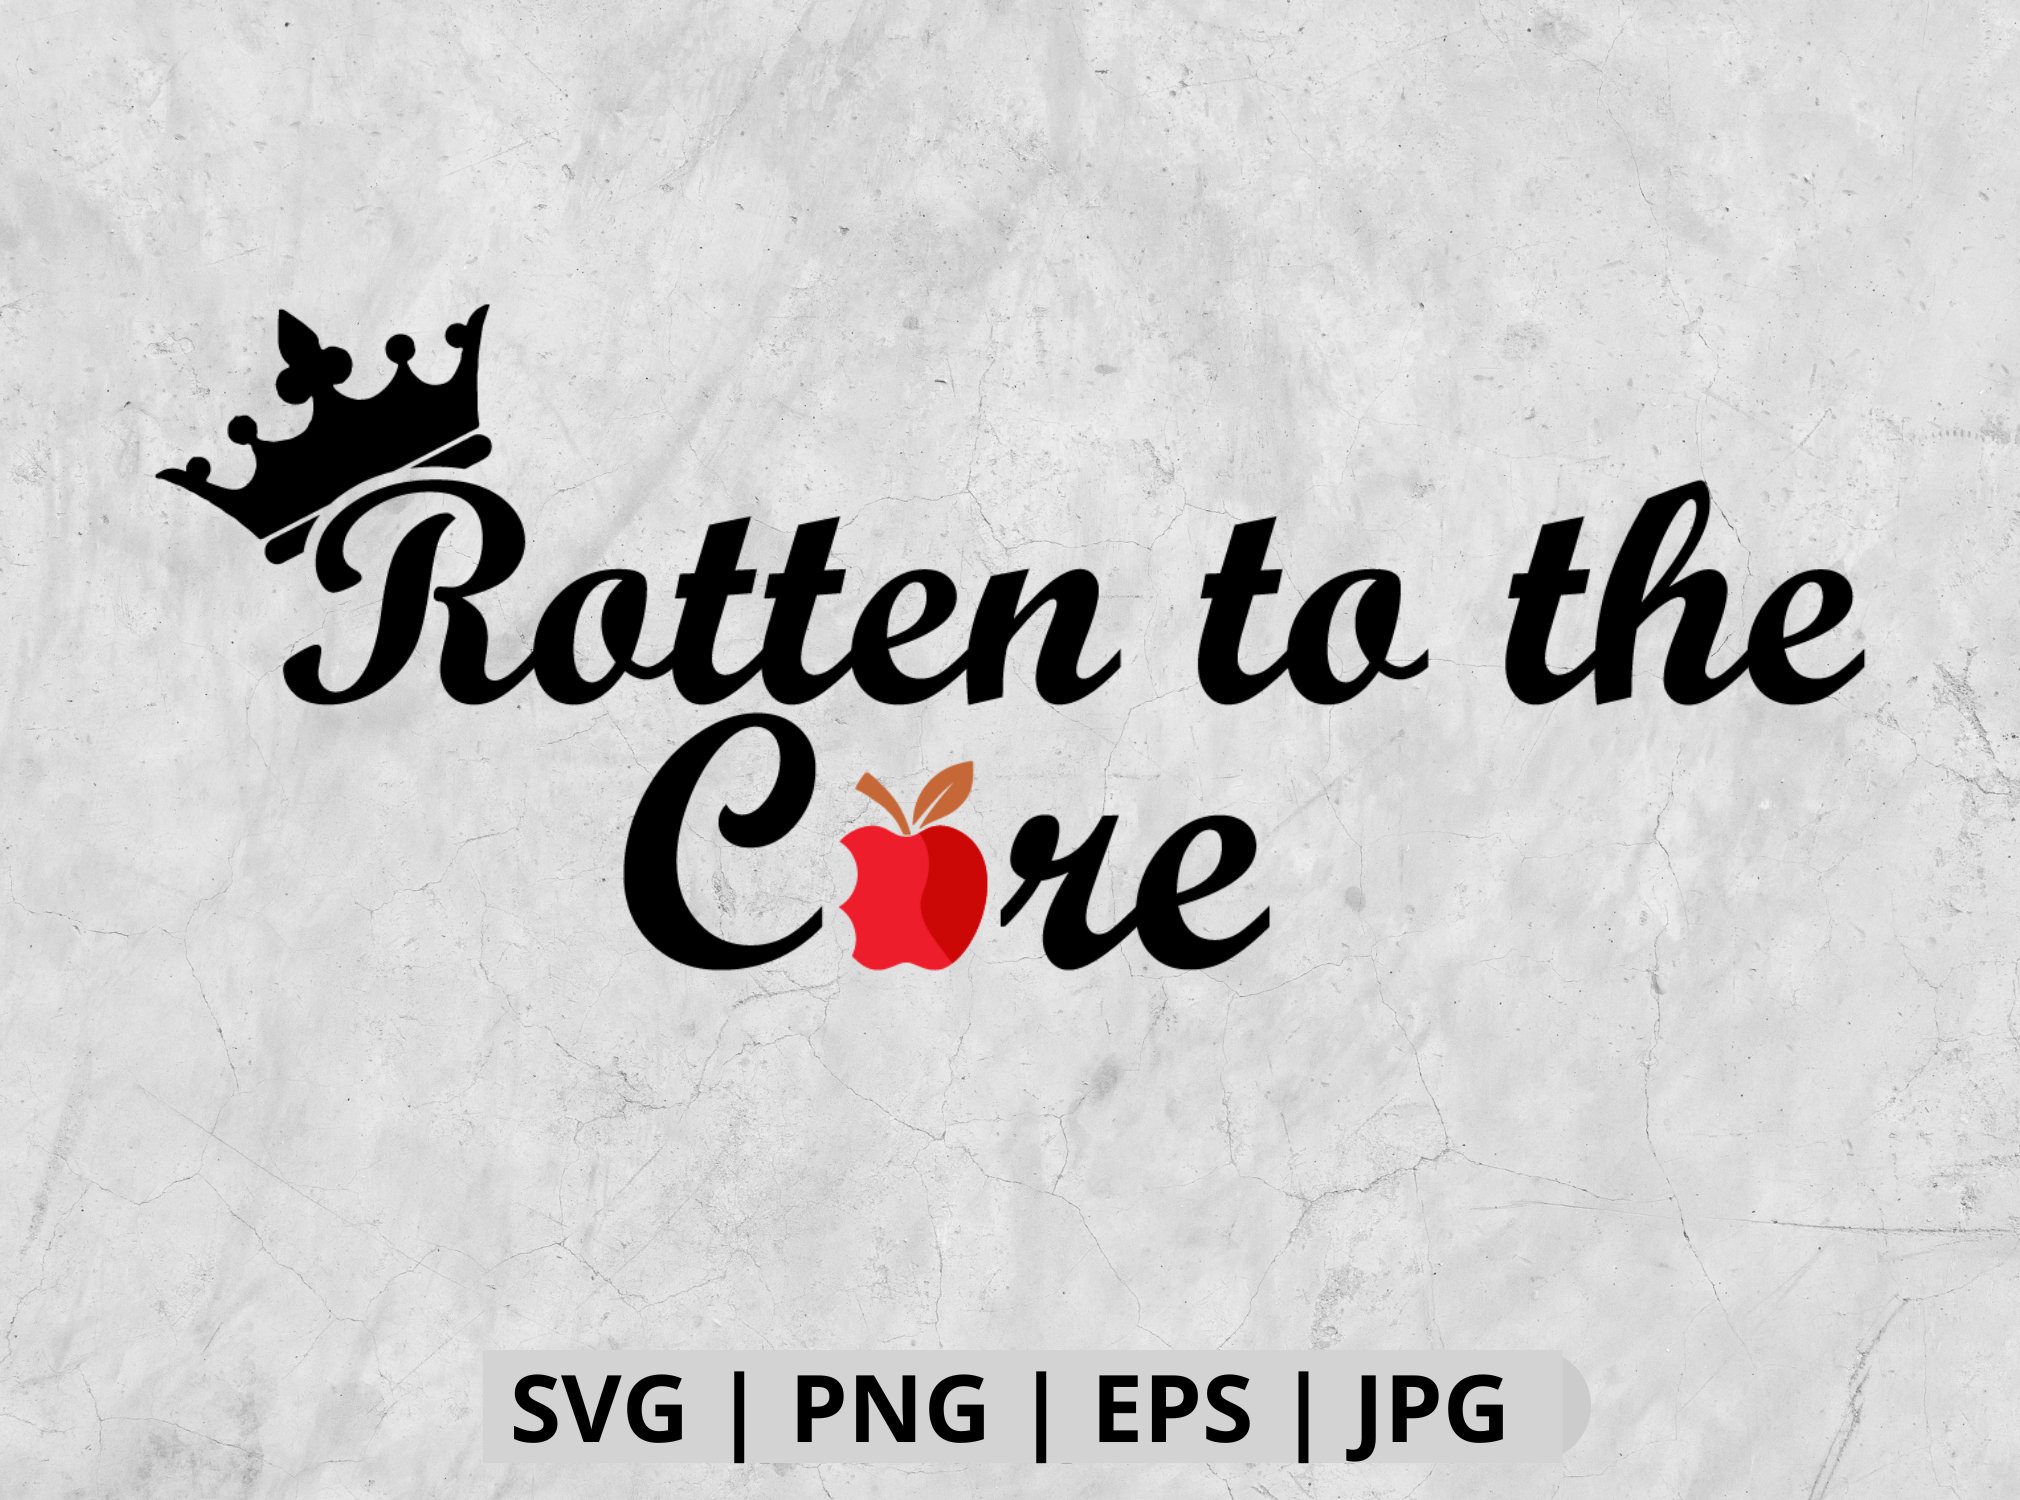 Rotten to the Core - Descendants-themed SVG file - Instant Download